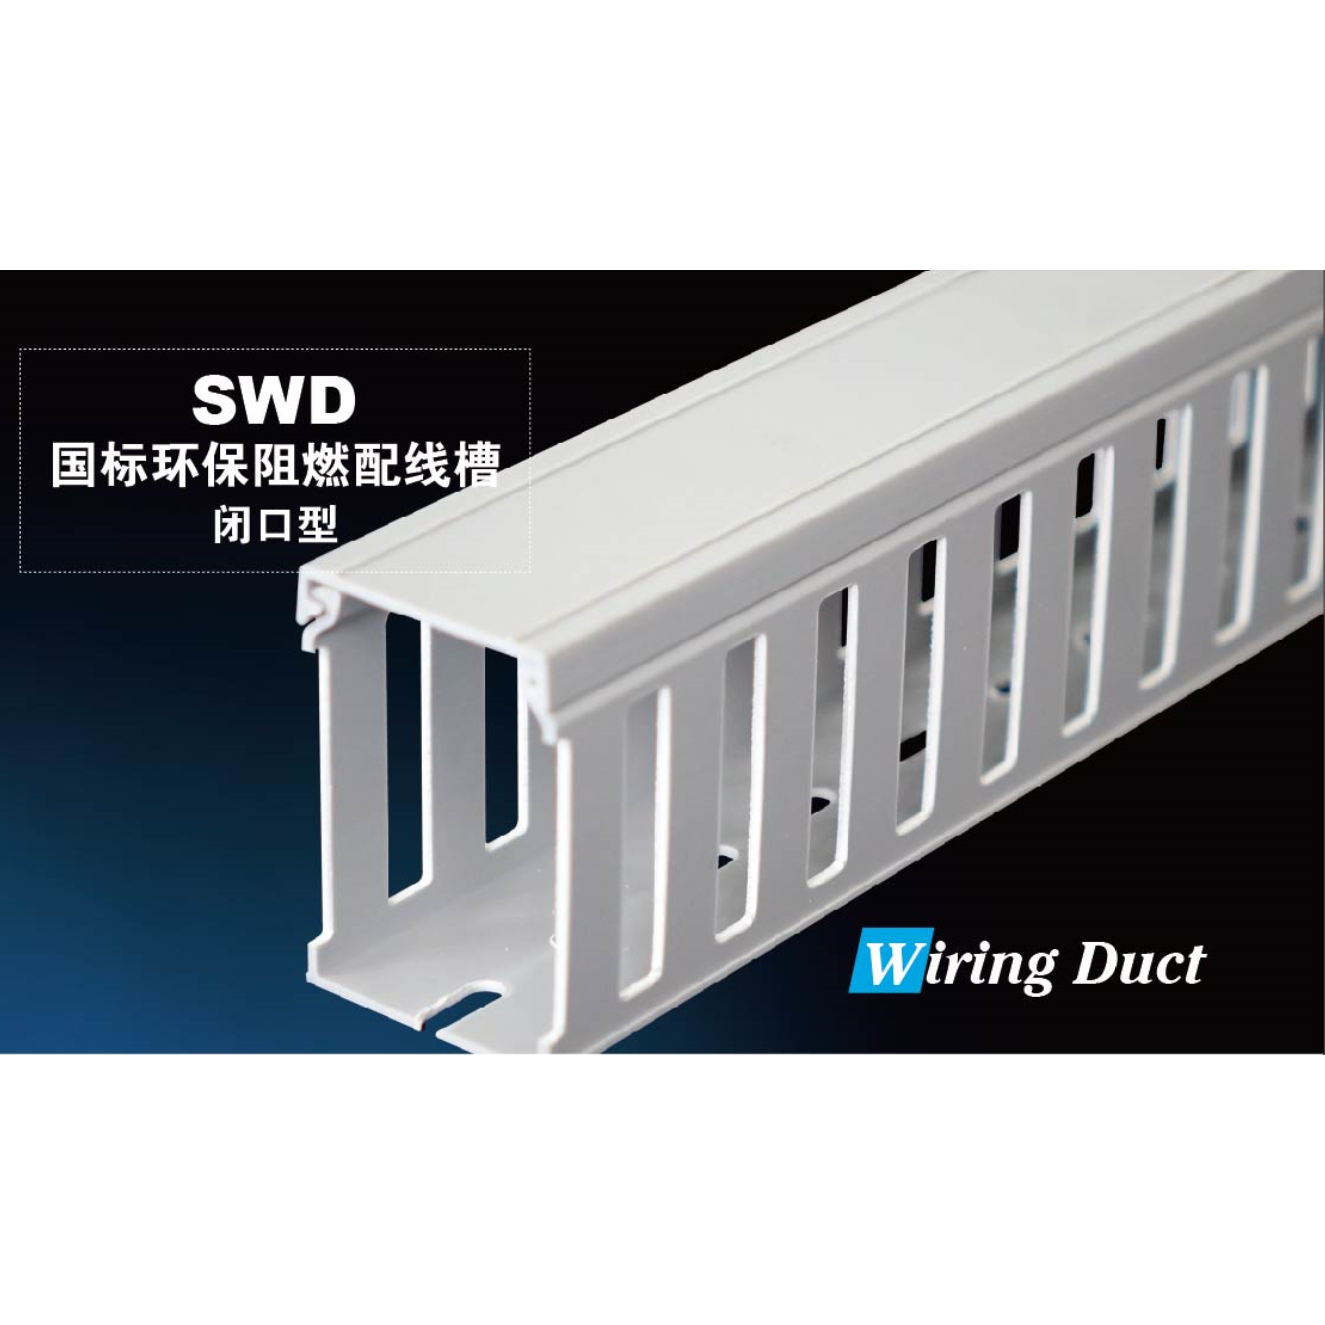 Wiring duct SWD